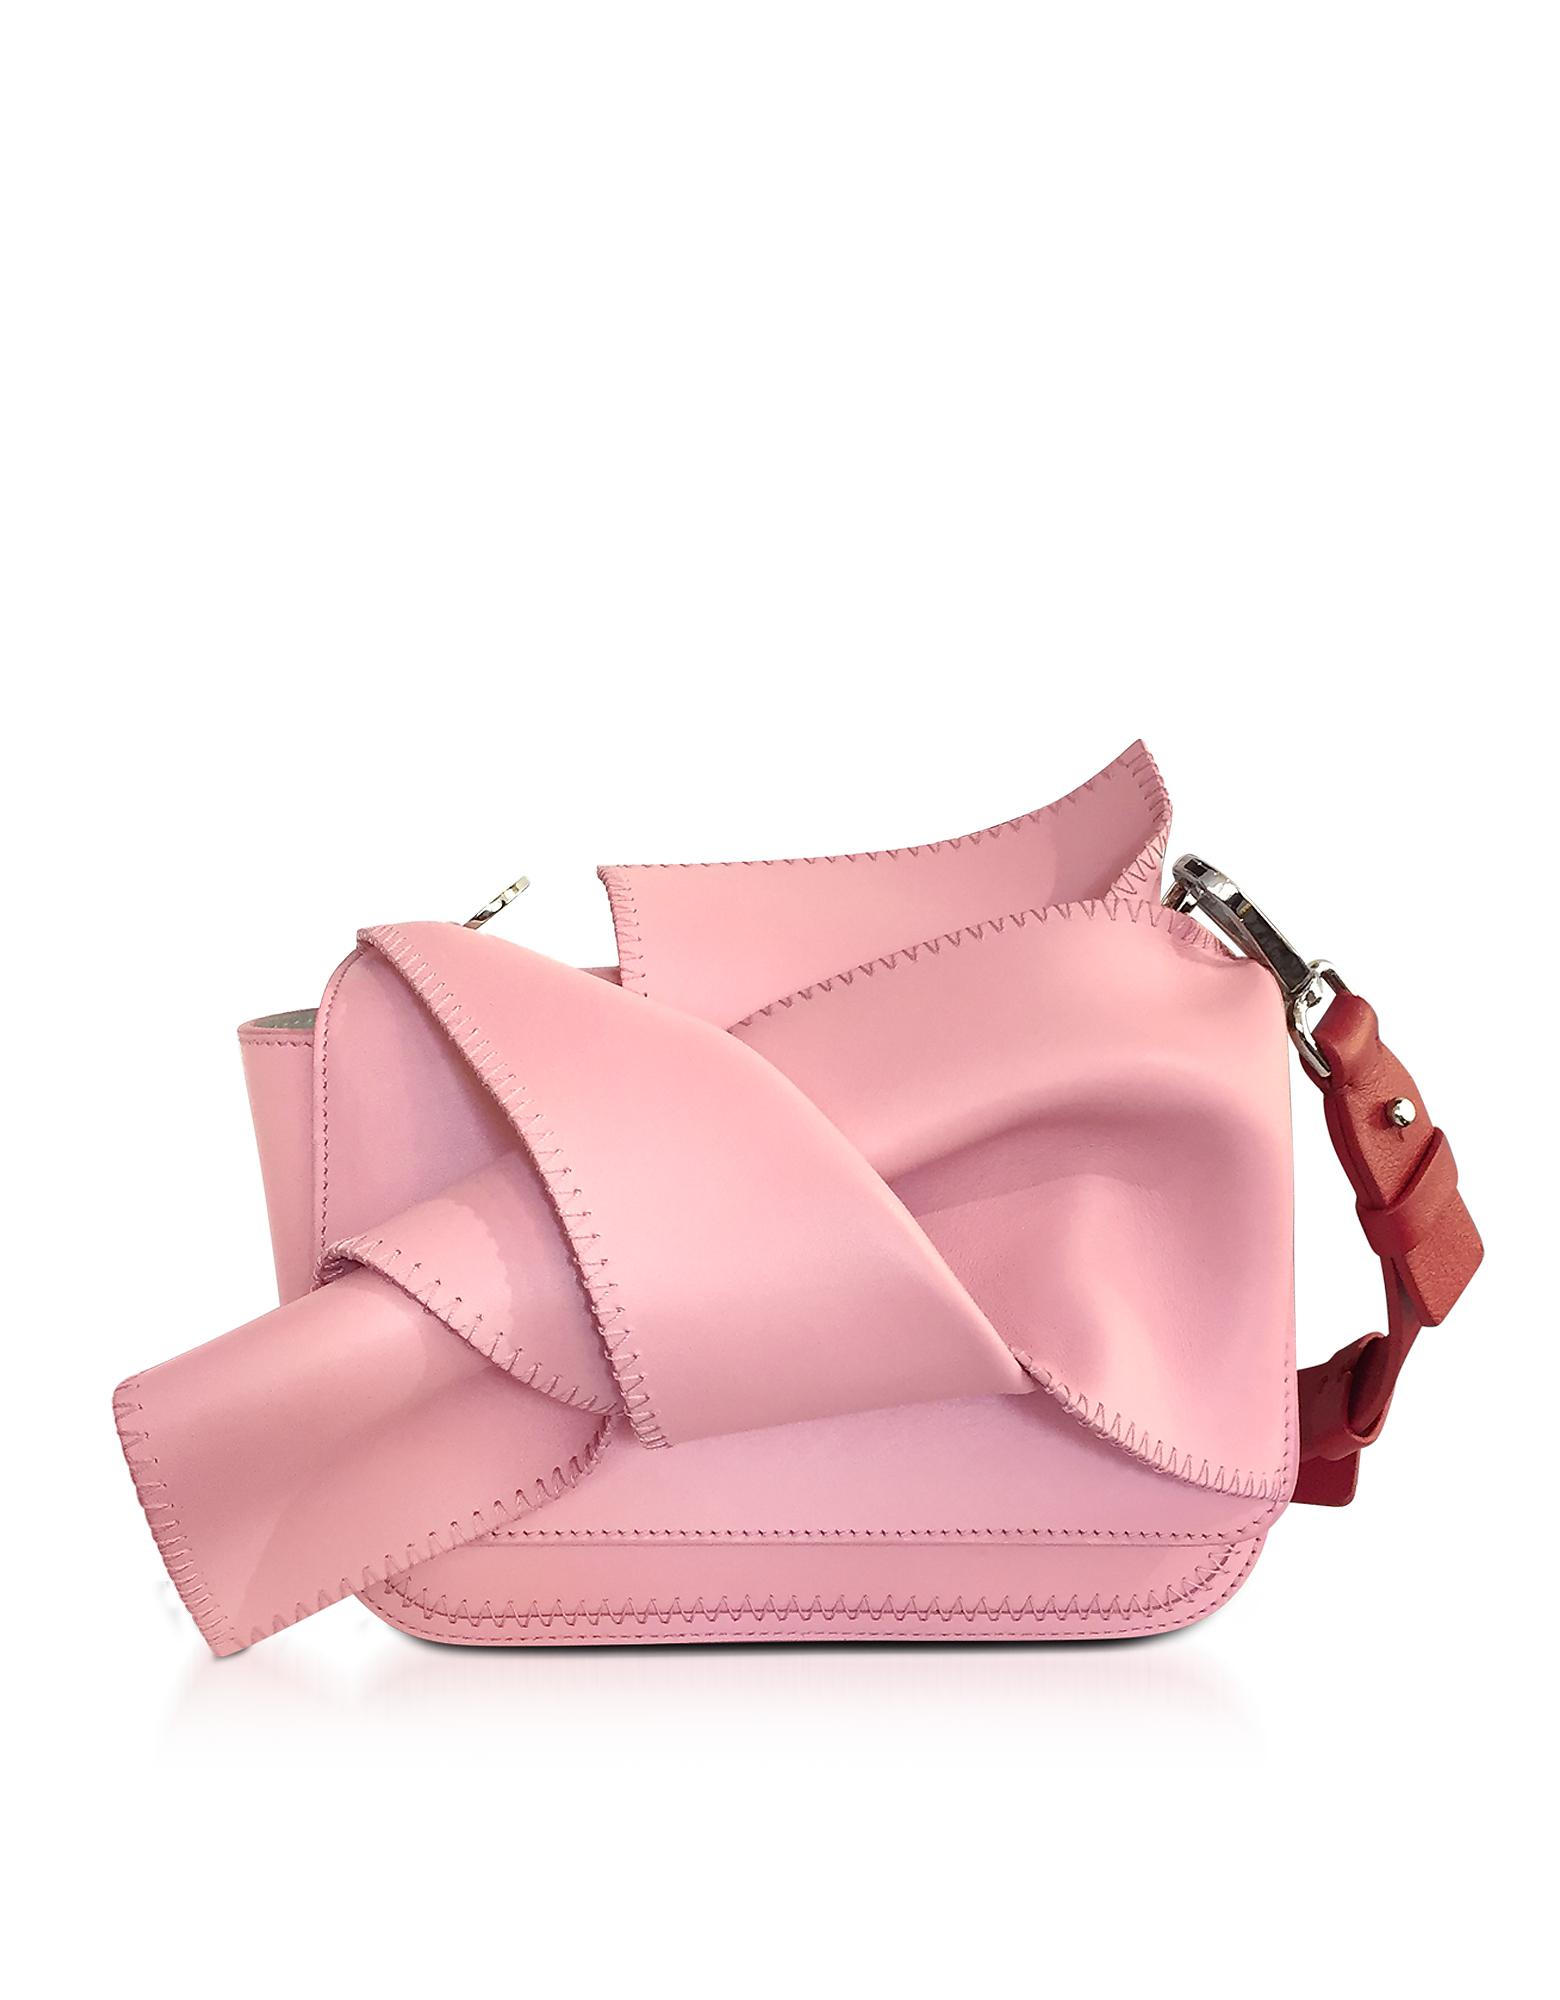 N°21 Small Pink Leather Bow Shoulder Bag W/red Leather Shoulder Strap - Lyst